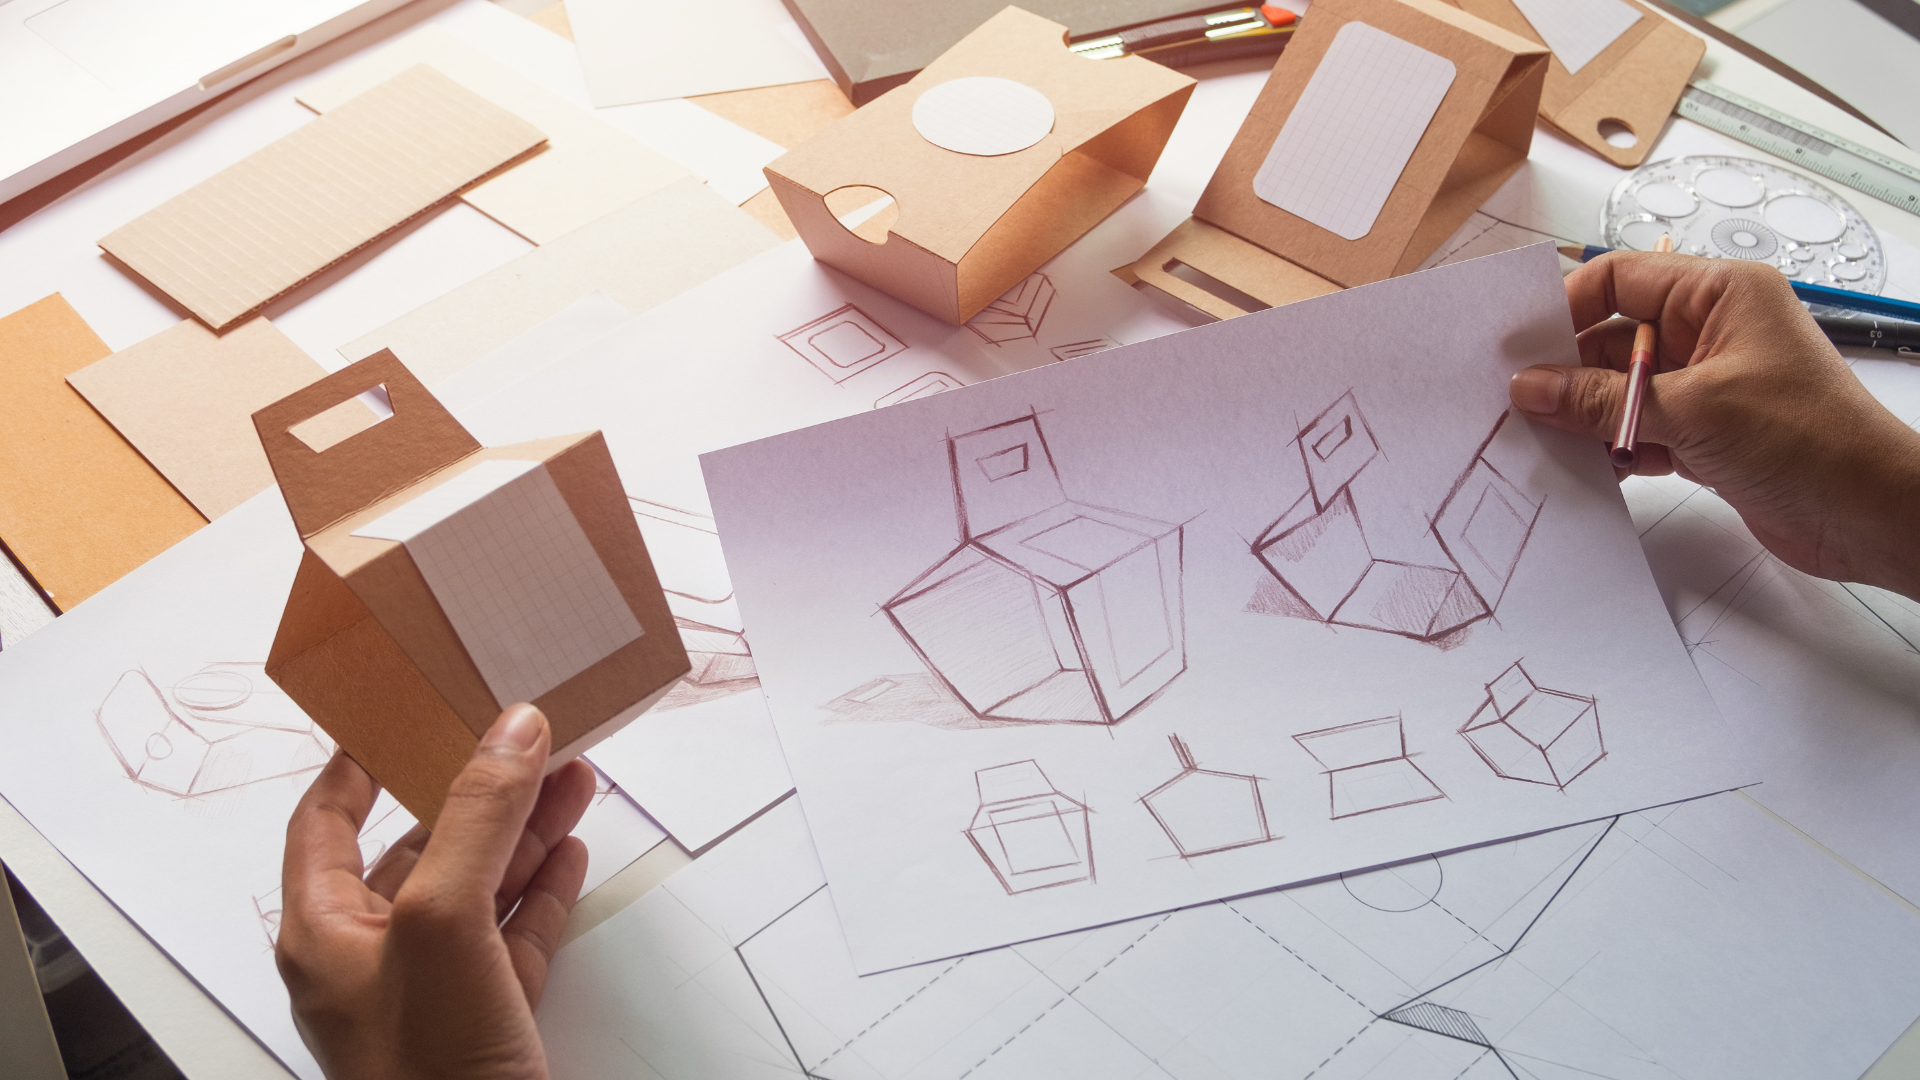 The Power of Product Packaging: How To Maximize Your Marketing Impact